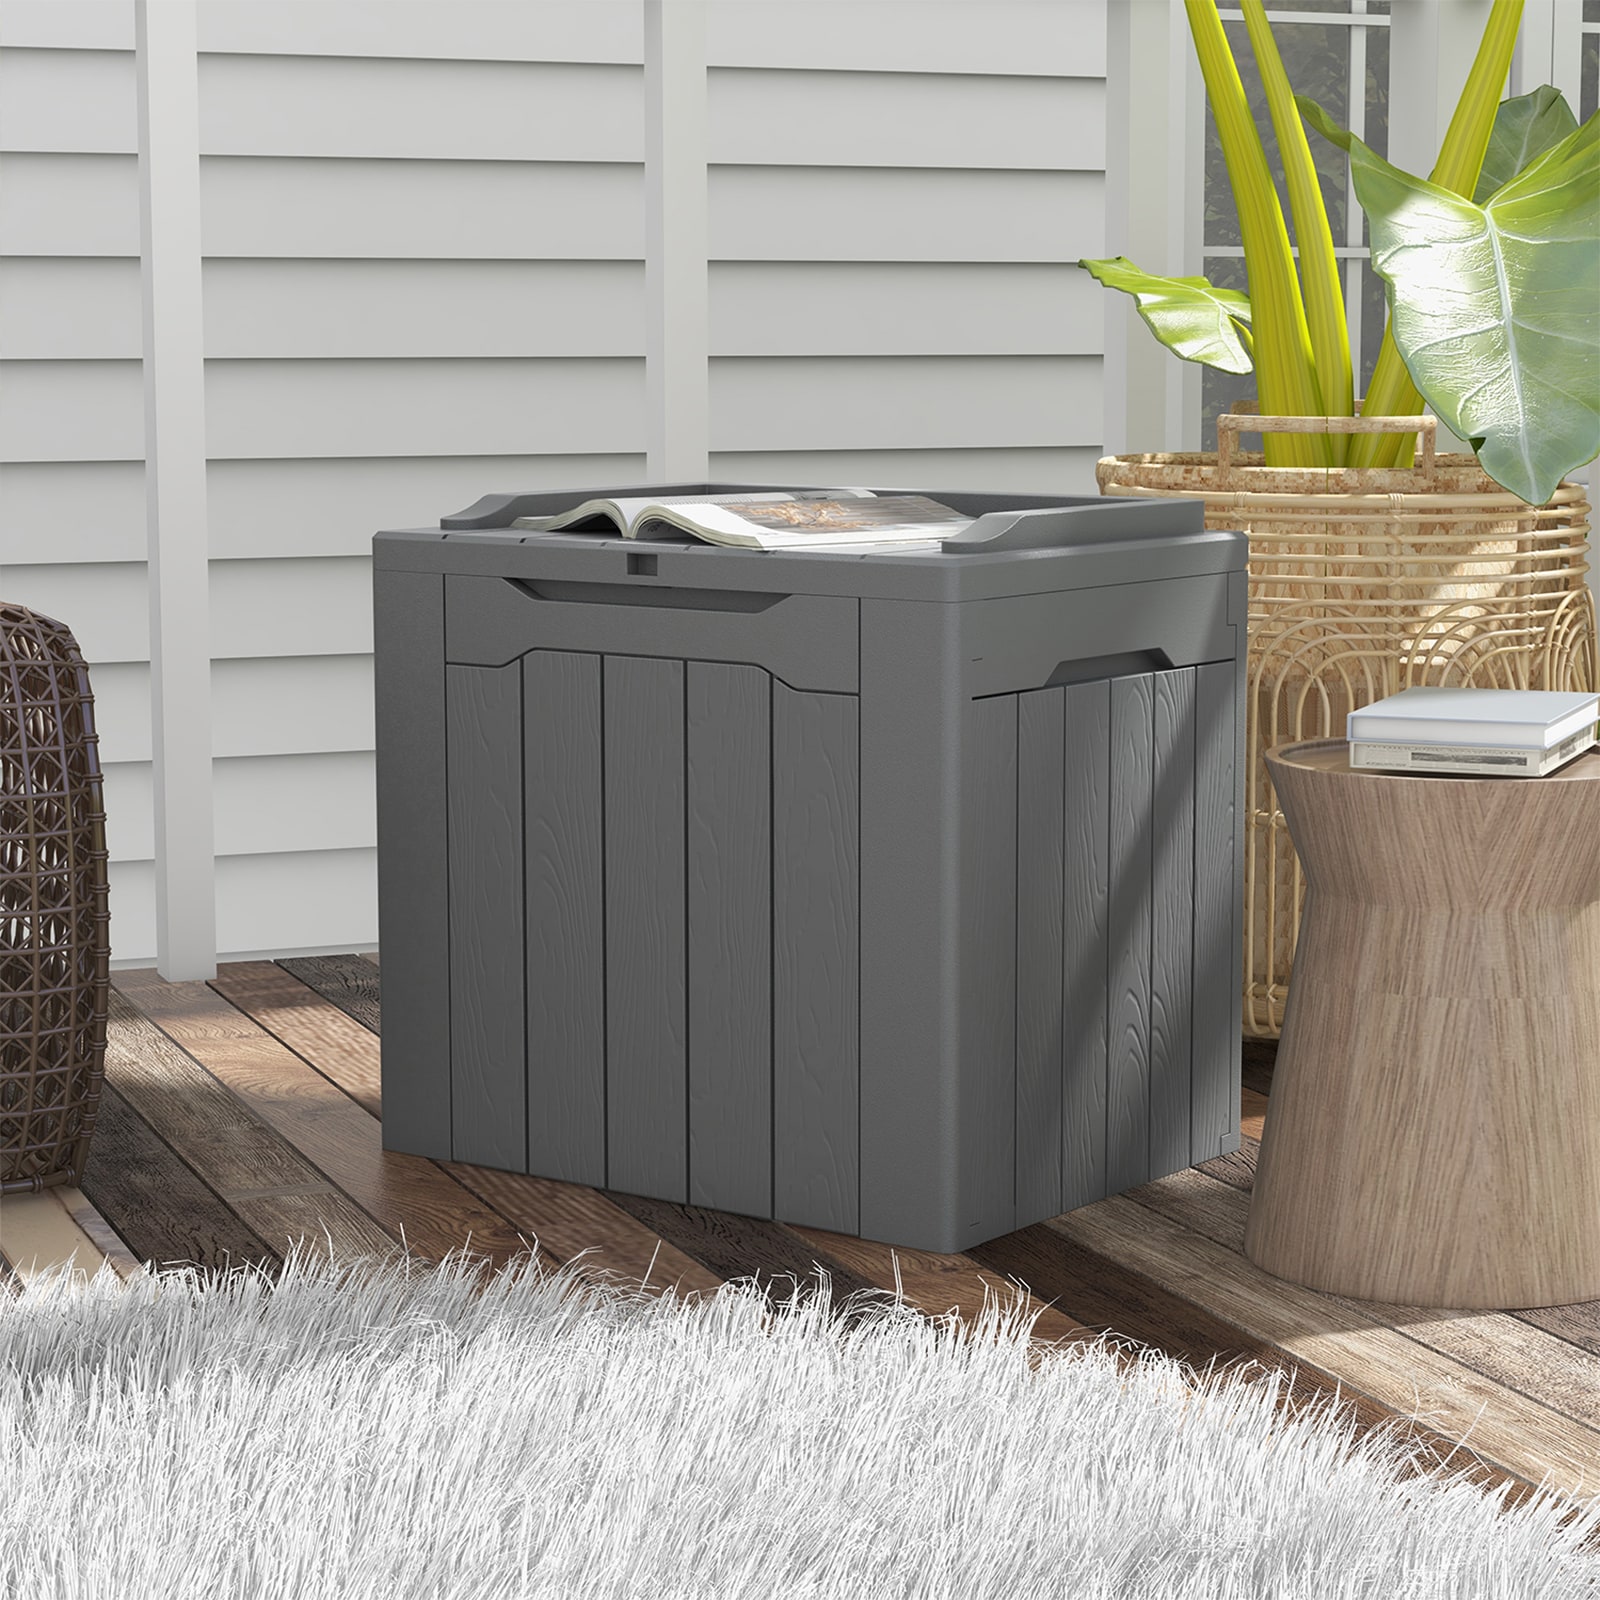 22.5 W x 11.5 D x 33.5 H Waste Container with Swing Lid, 23 Gallon, Space Saving Slim Profile Trash Can Storage